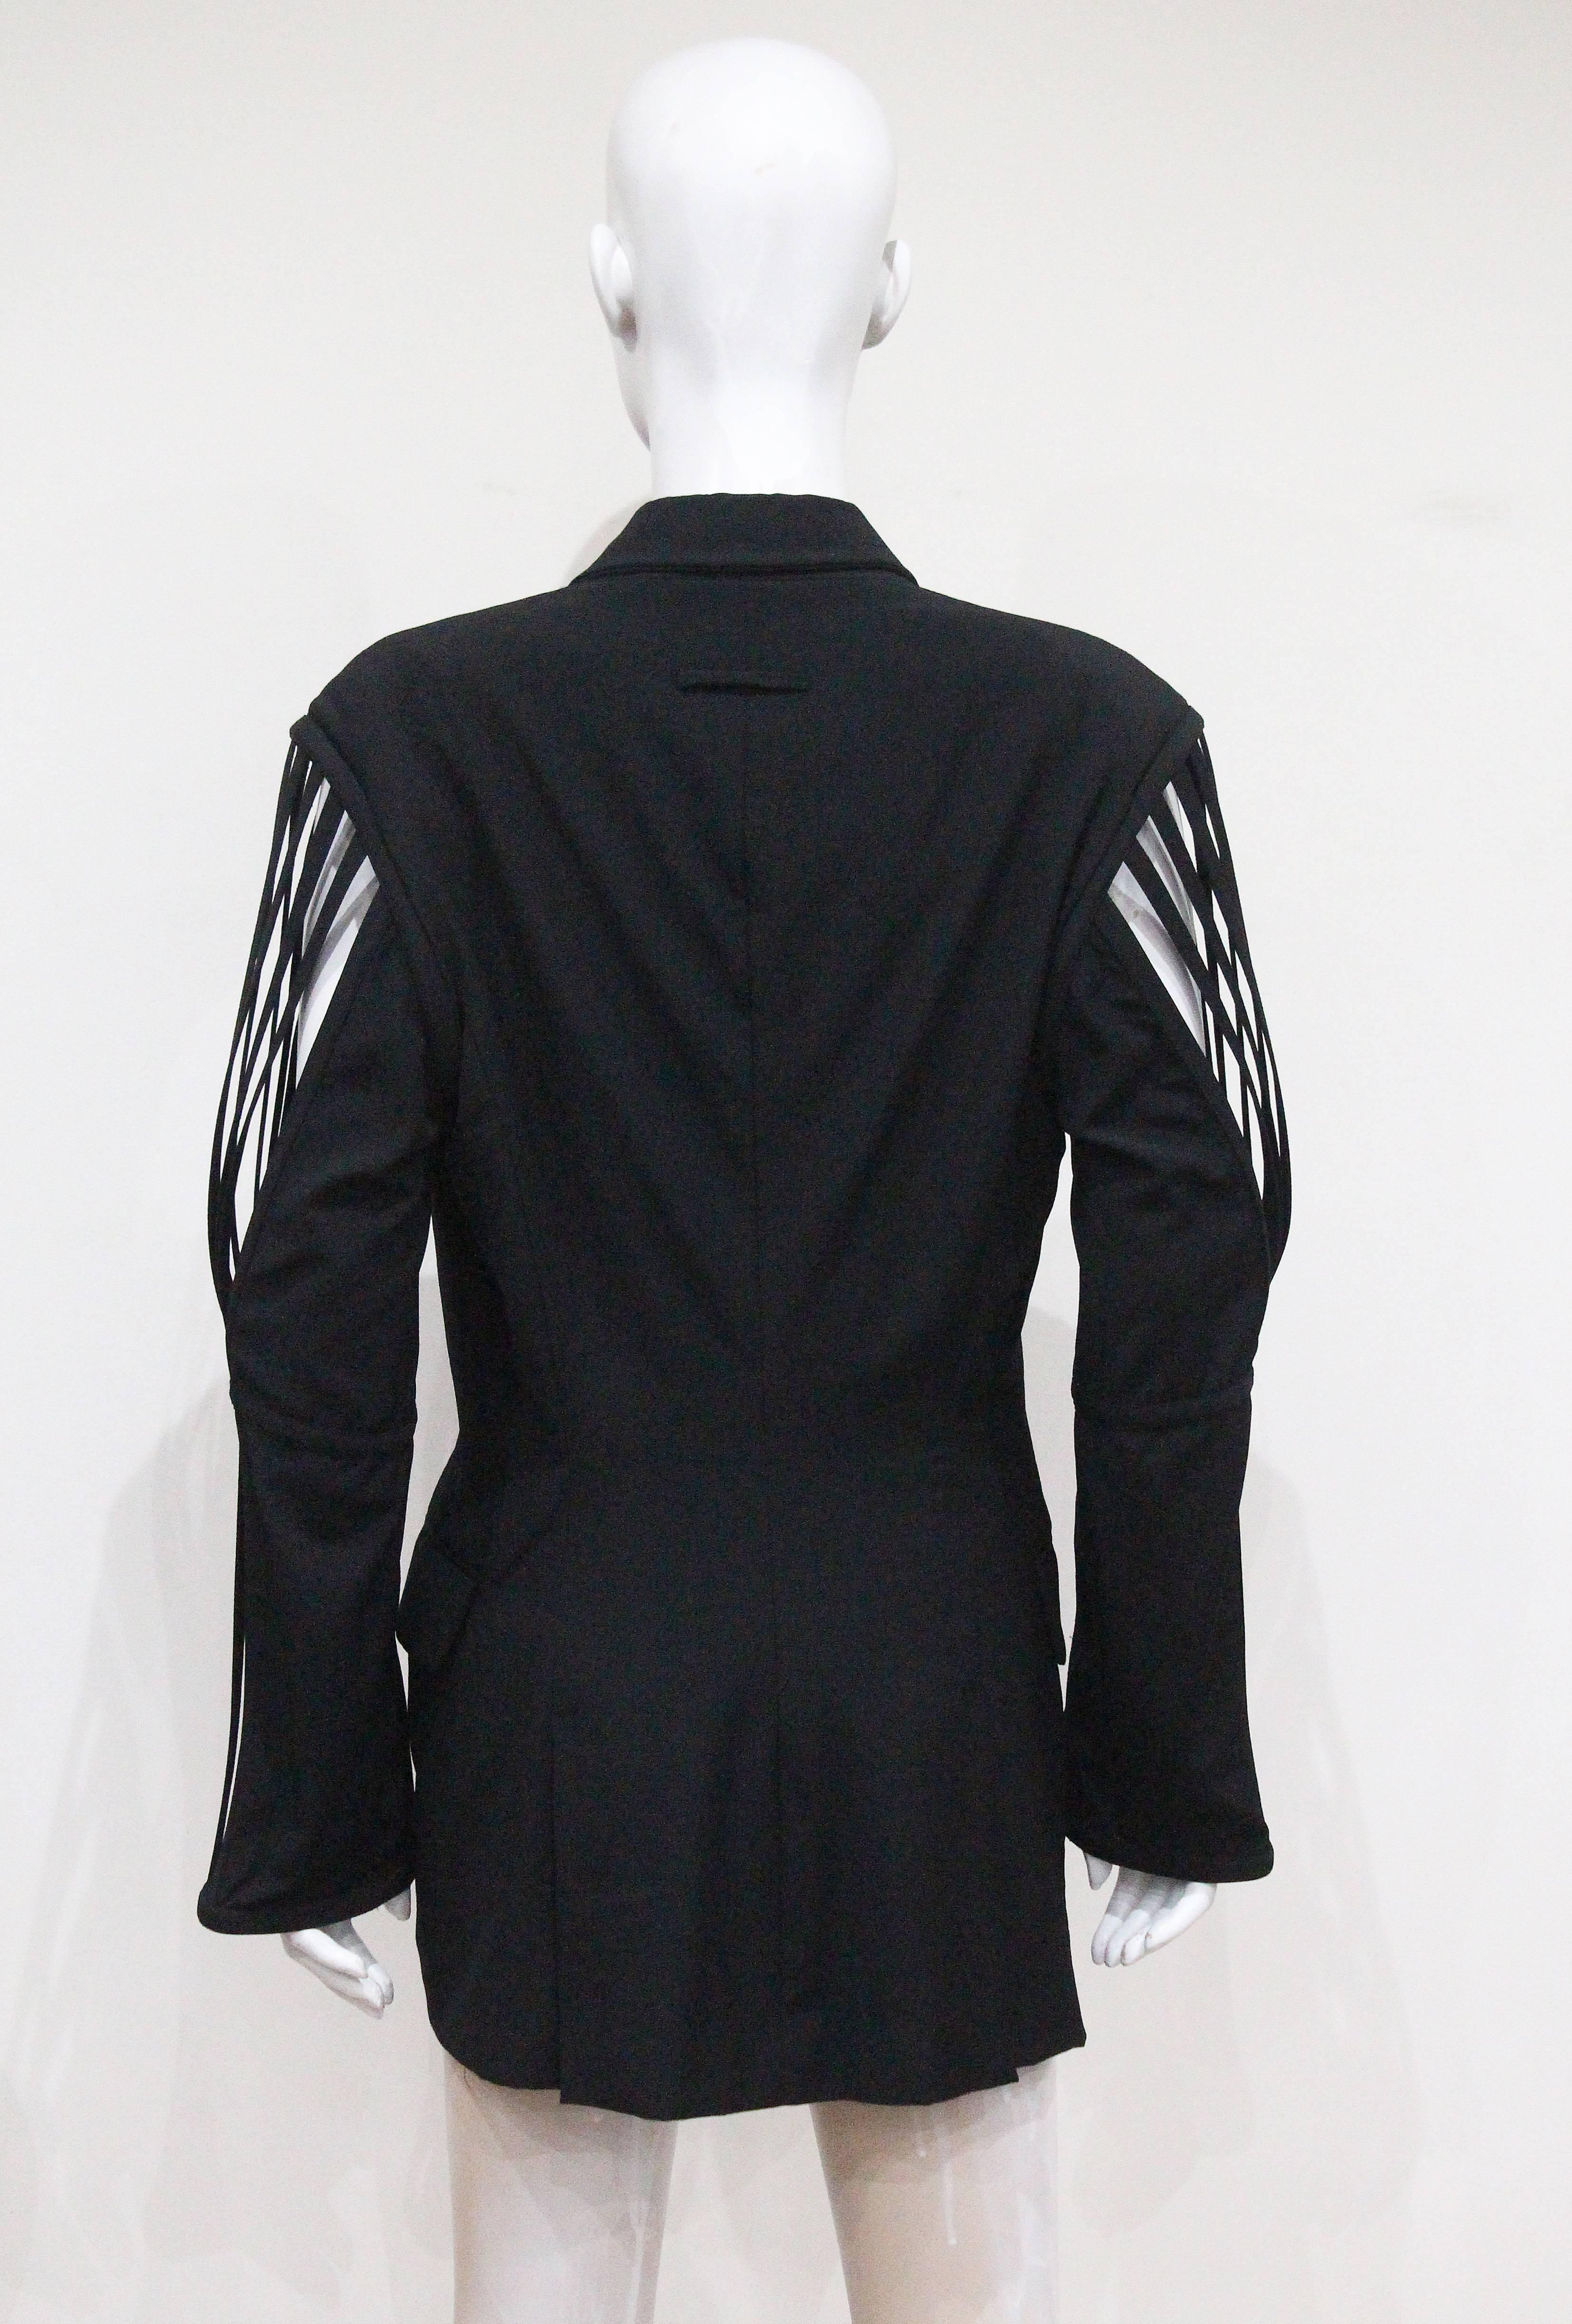 Jean Paul Gaultier double breasted blazer jacket with caged sleeves, c. 1989 1